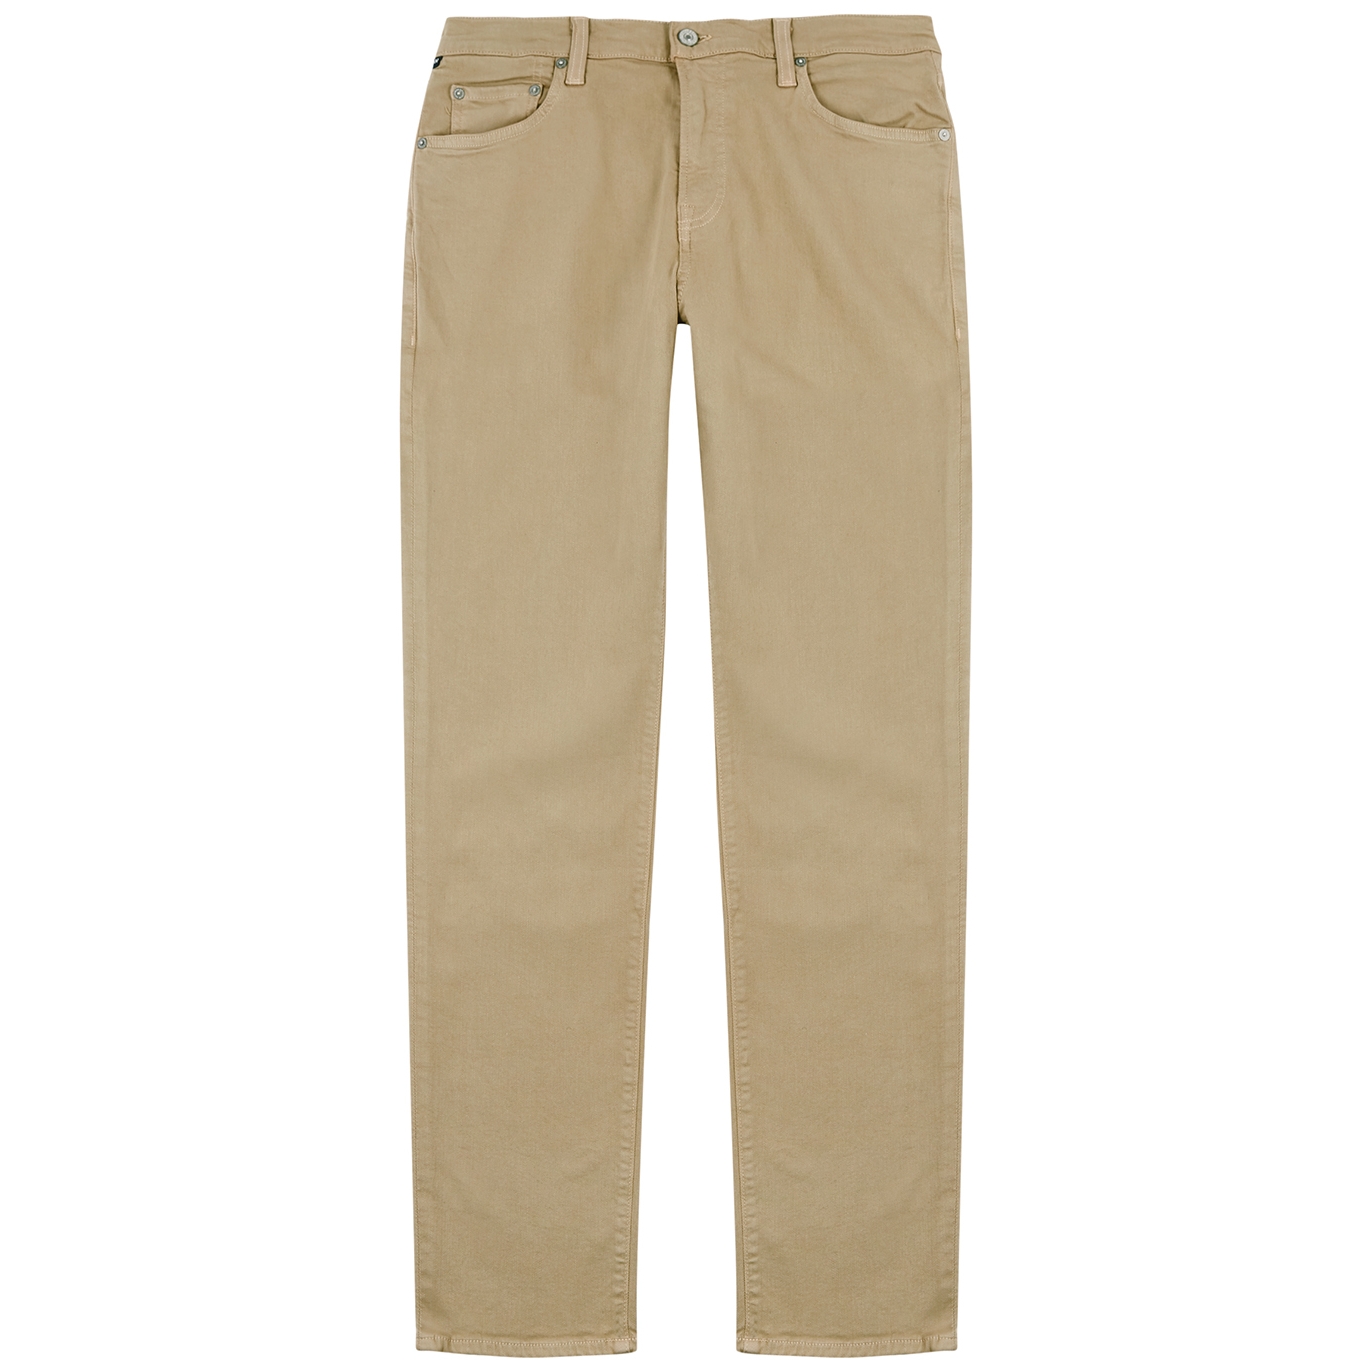 Citizens Of Humanity Adler Tapered-leg Jeans - TAN - 36